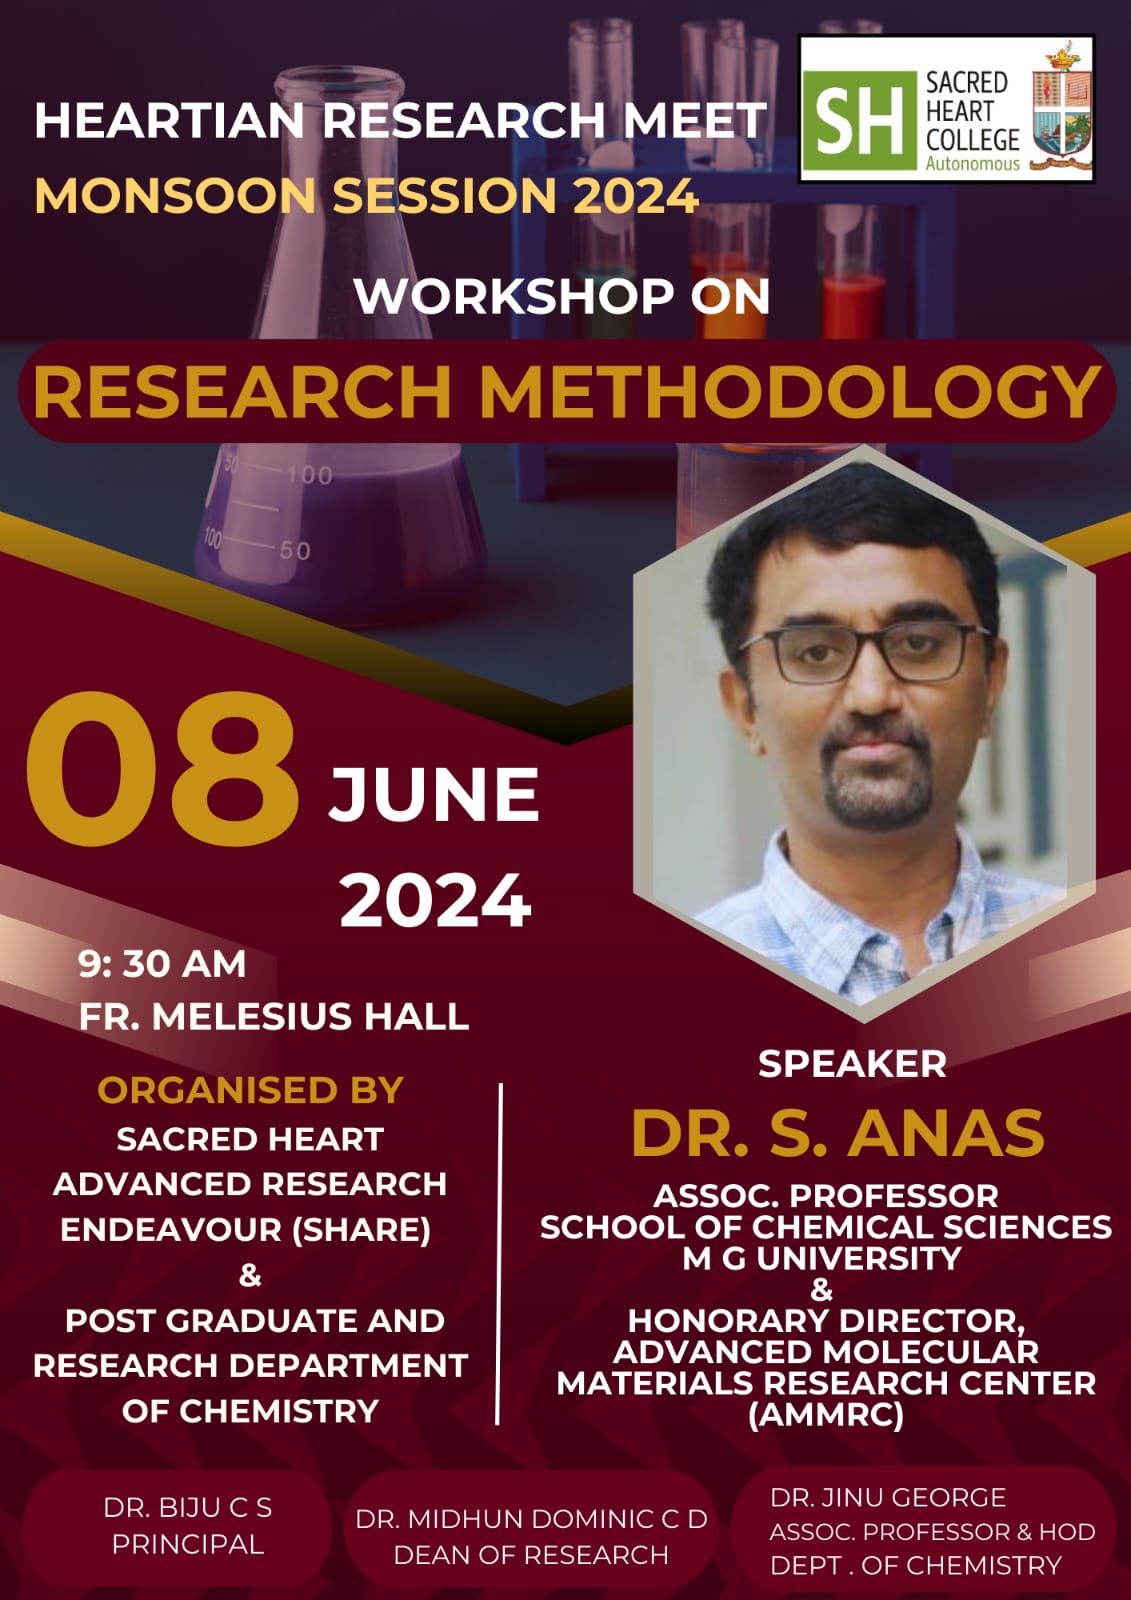 Heartian Research Meet-Monsoon Session 20204